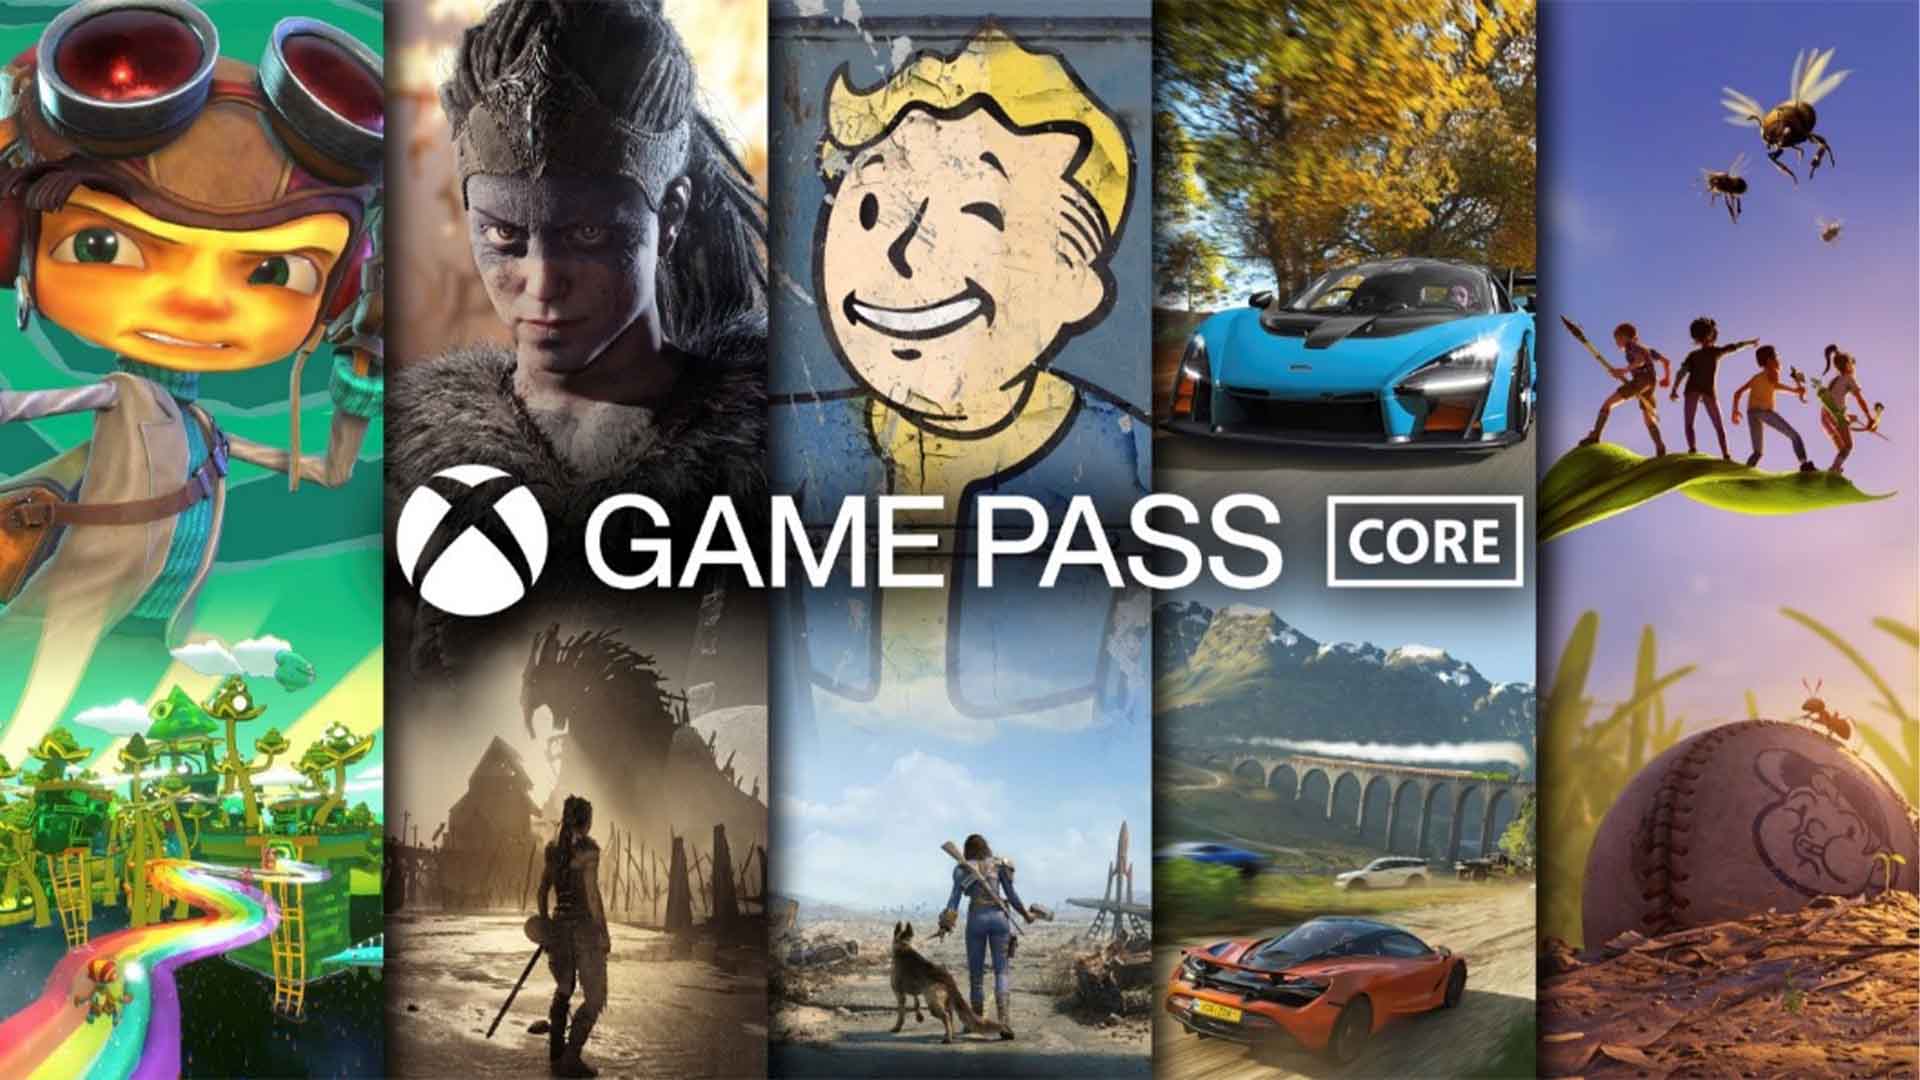 Marvel and Halo geeks will love Xbox Game Pass Ultimate's new